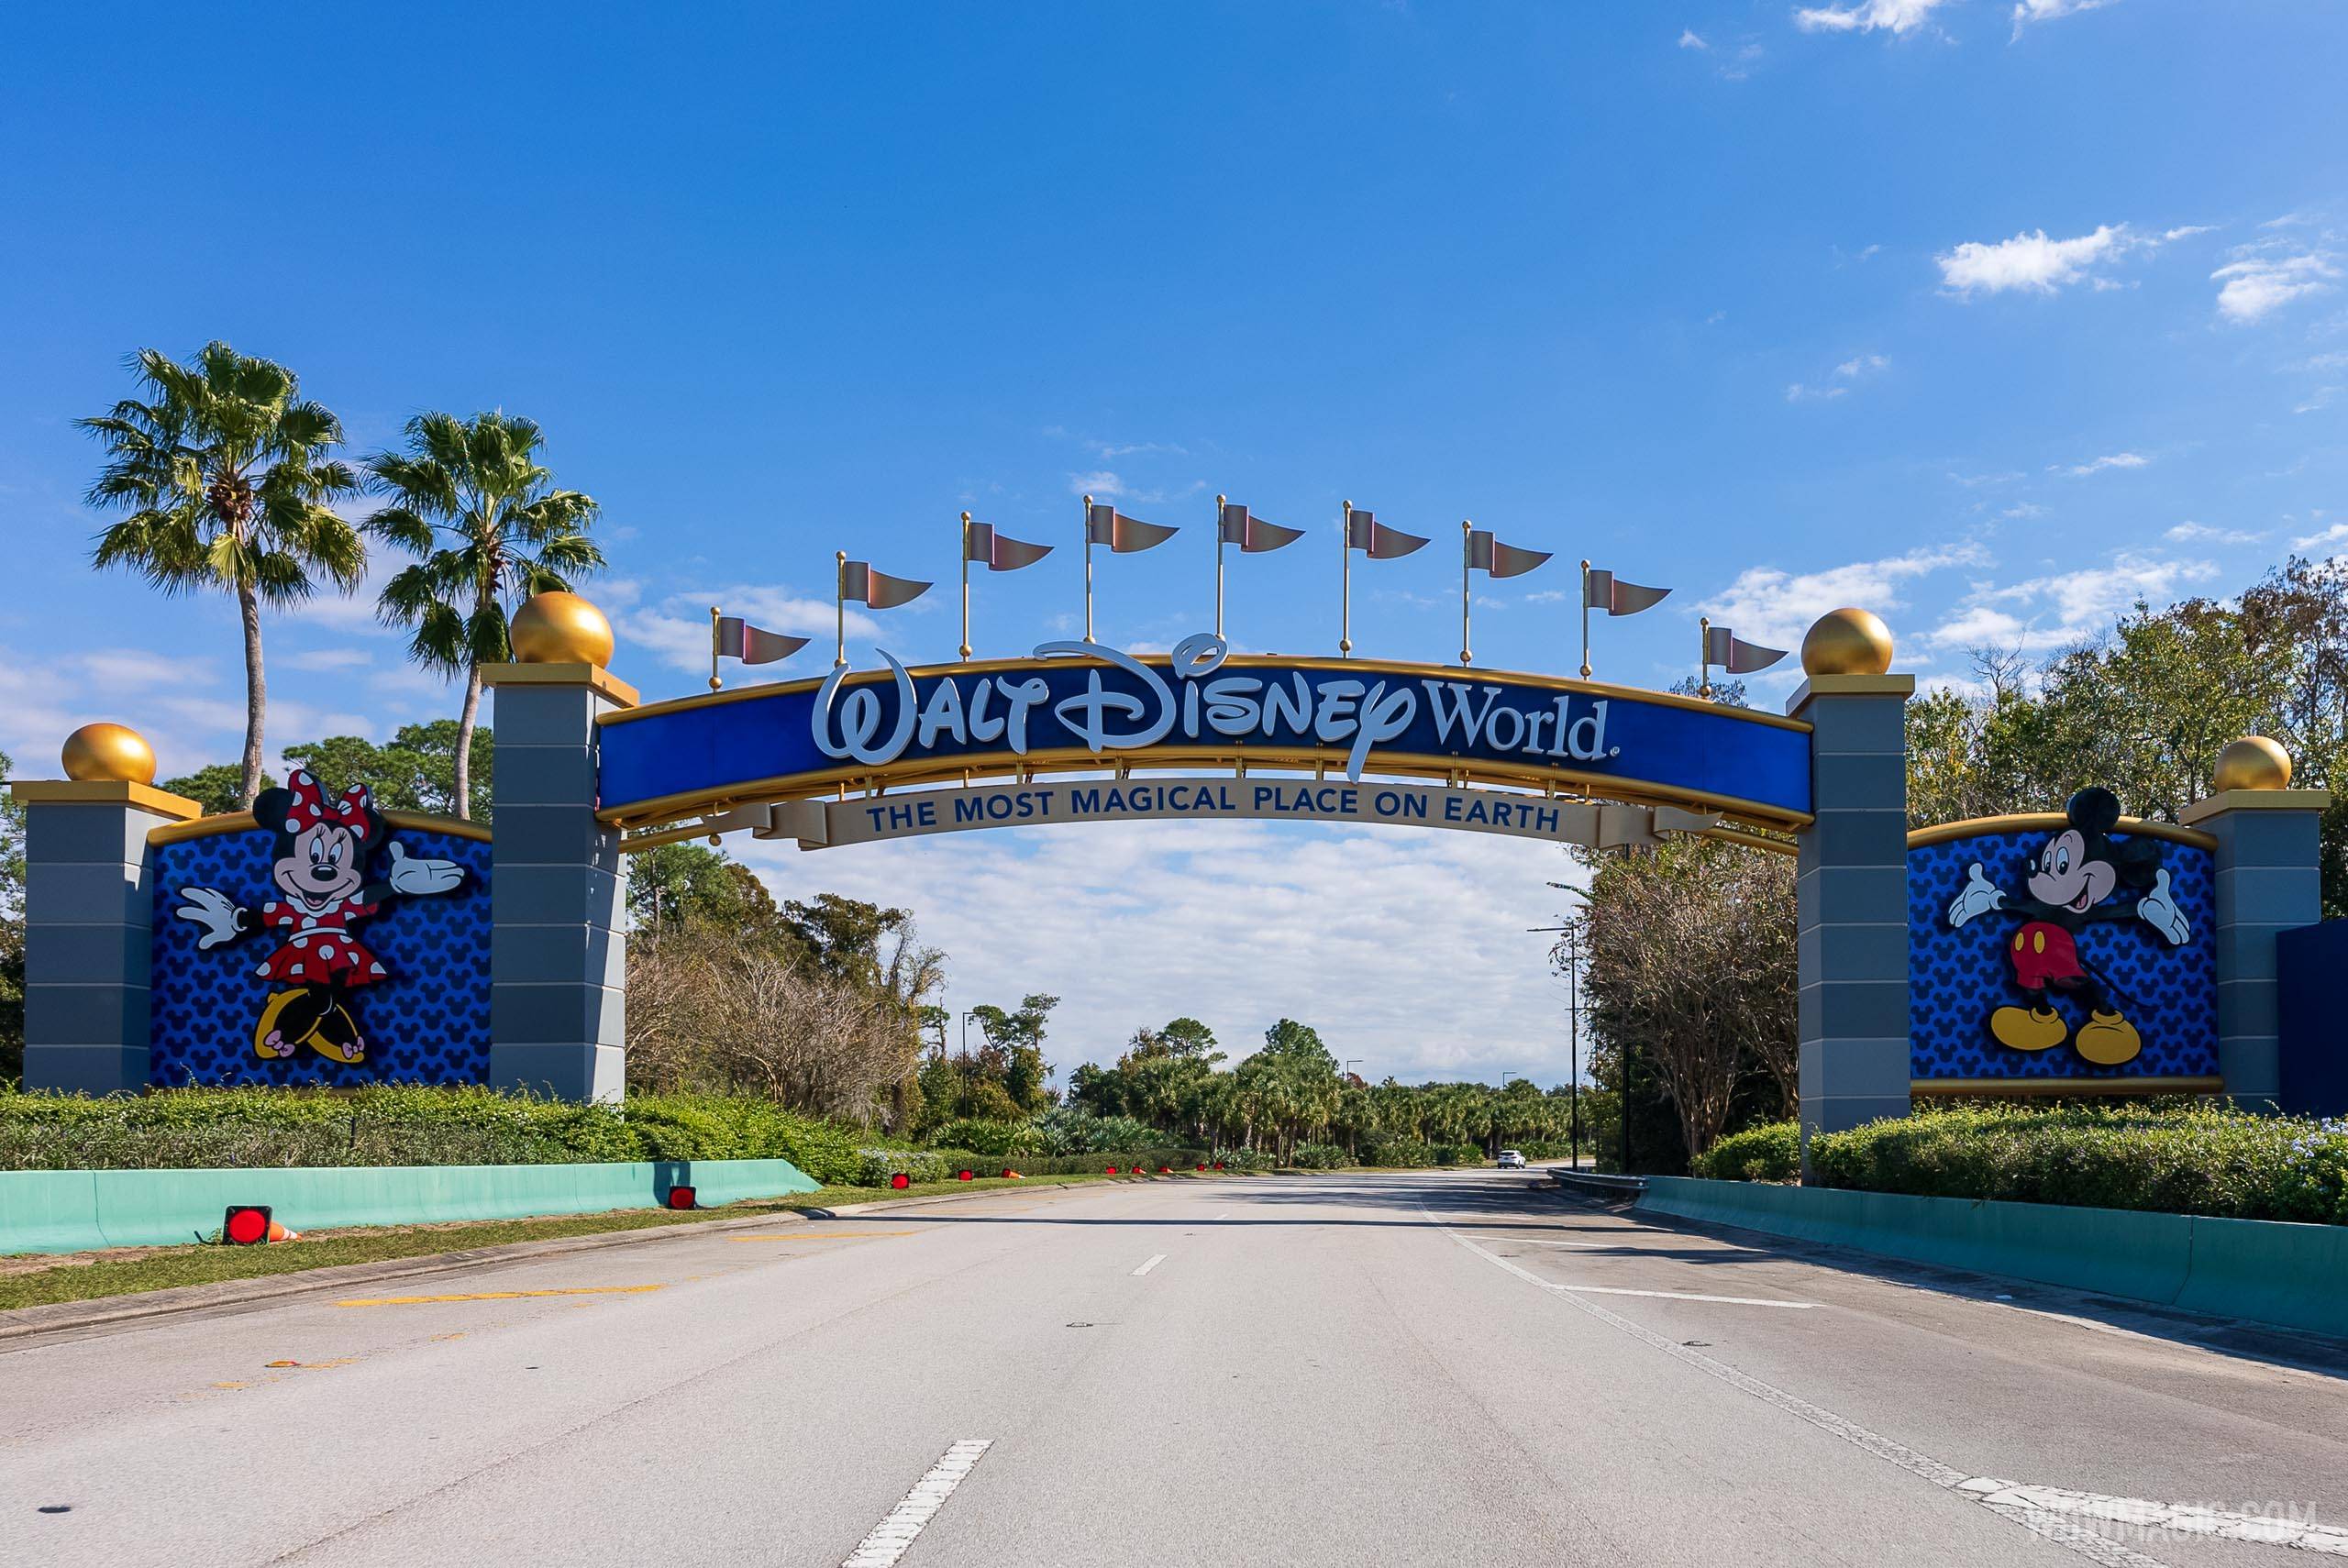 PHOTOS - 'The Most Magical Place on Earth' tagline installed on the Western Way gateway entrance